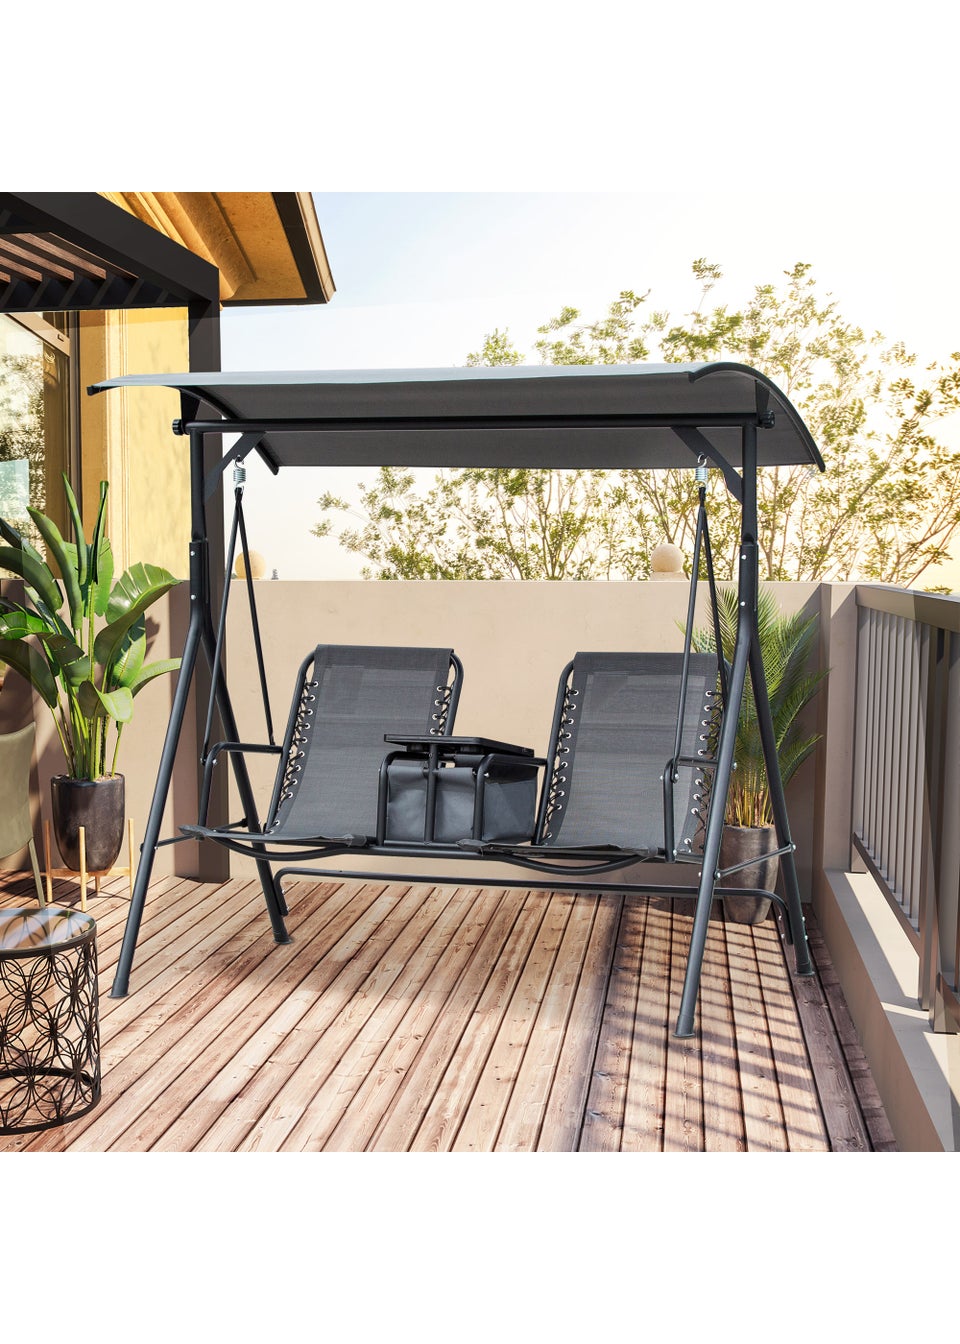 Outsunny Grey 2 Seater Canopy Swing Chair with Table (166cm x 110cm x 162cm)